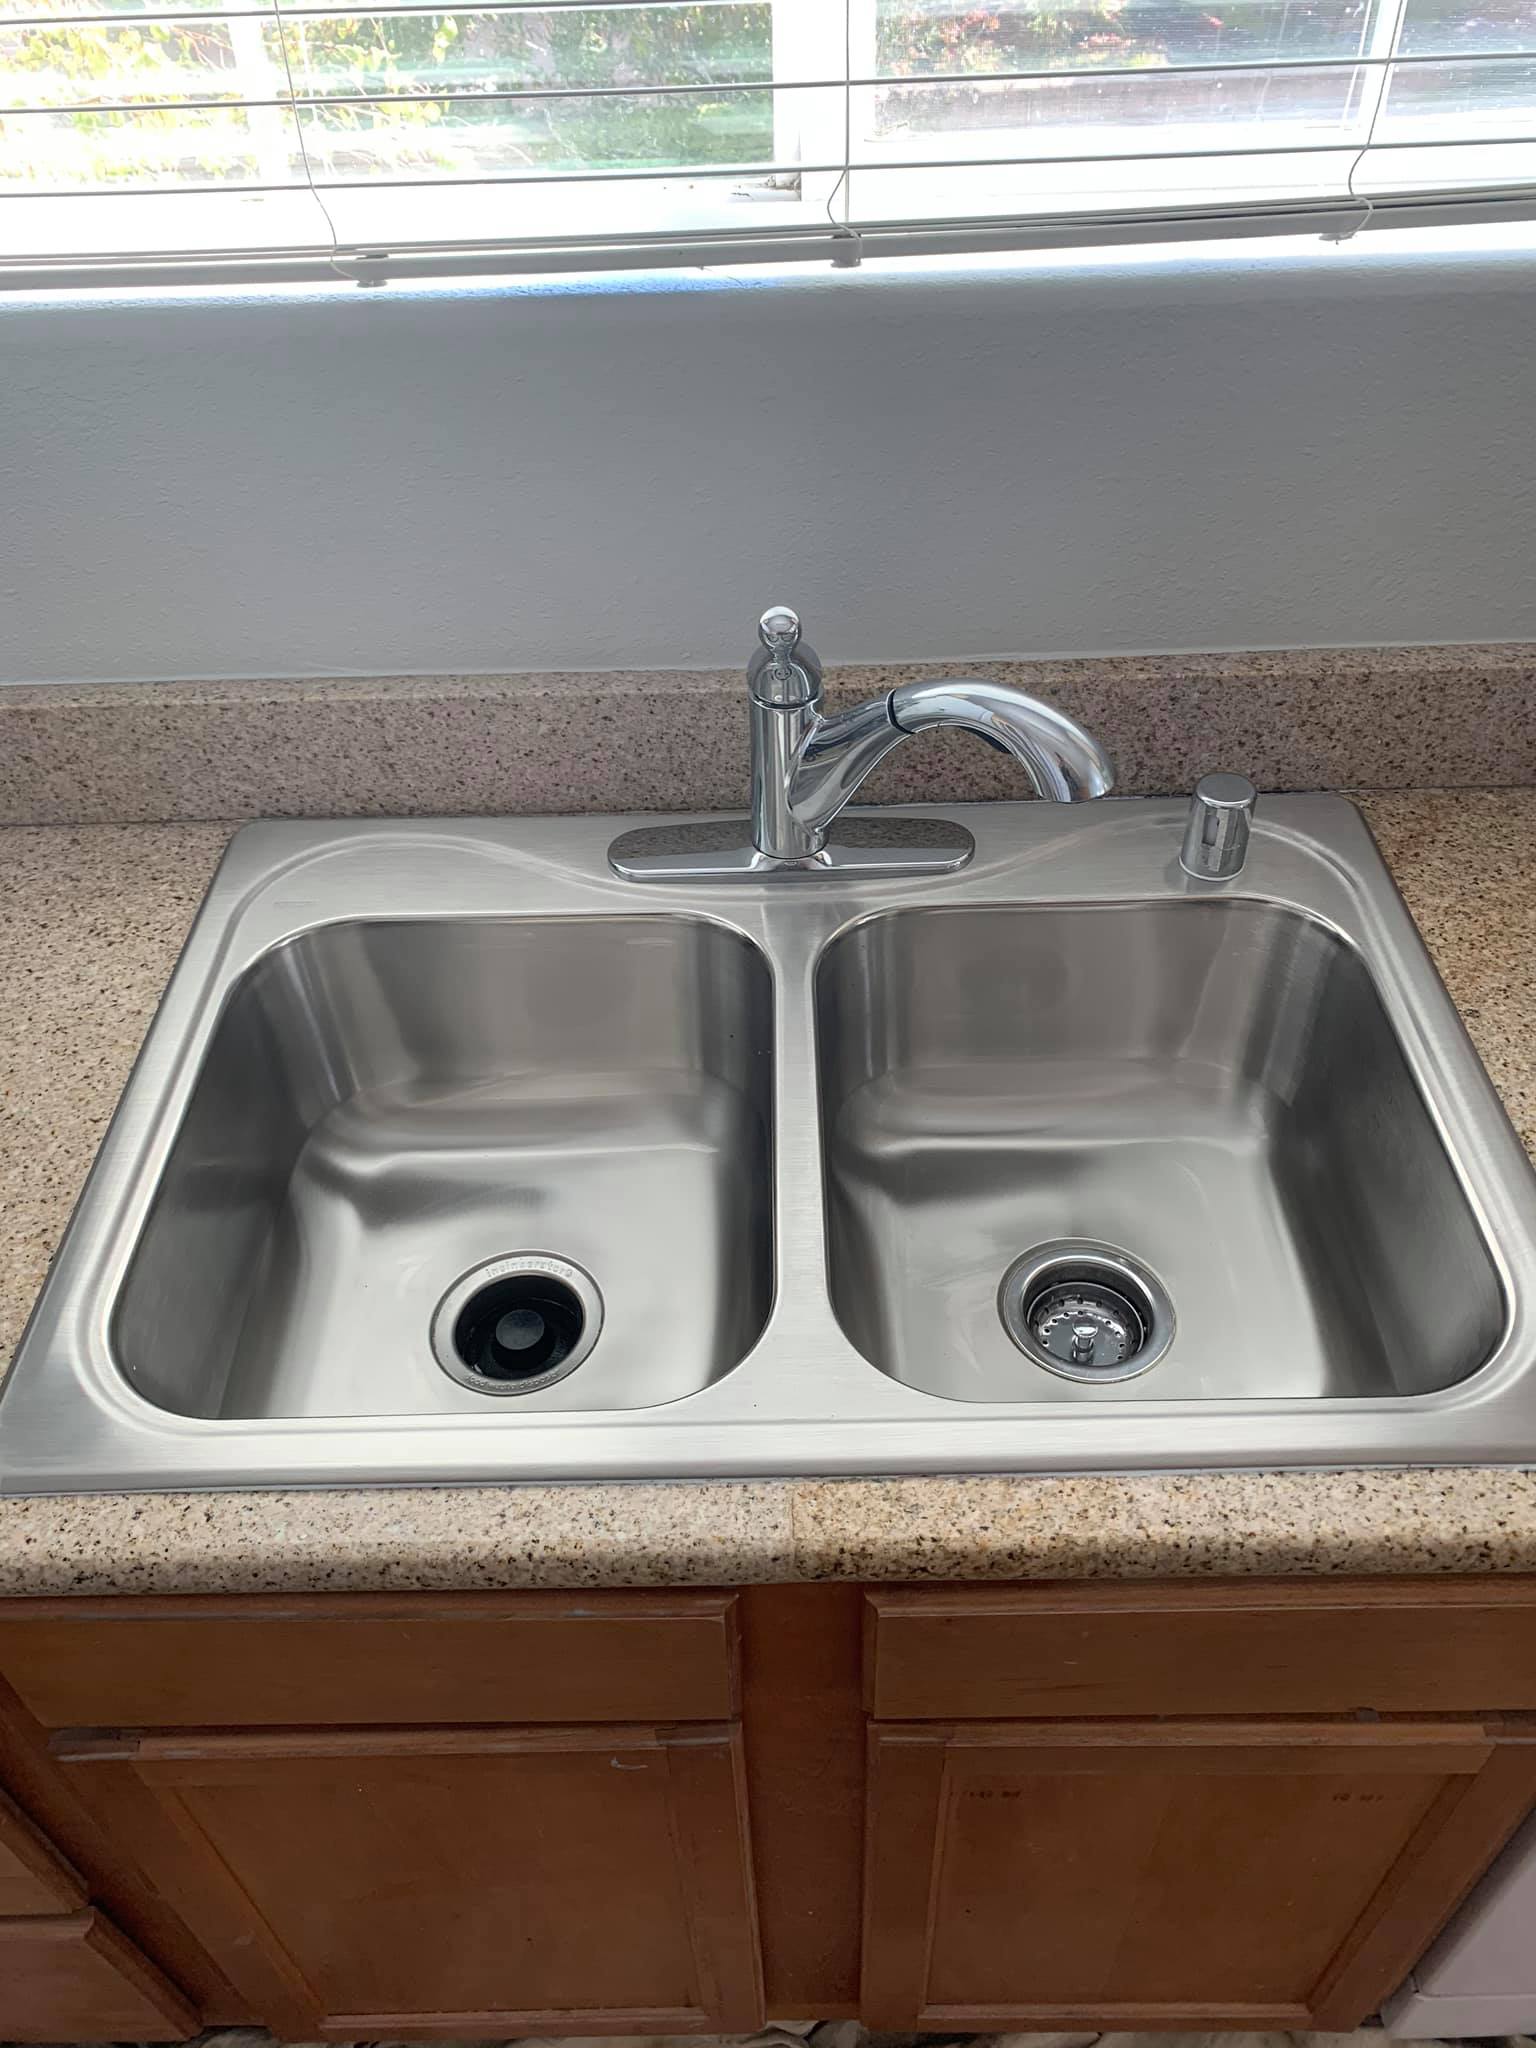 Toilet, Sink and Faucets Repair Services in Sacramento, CA